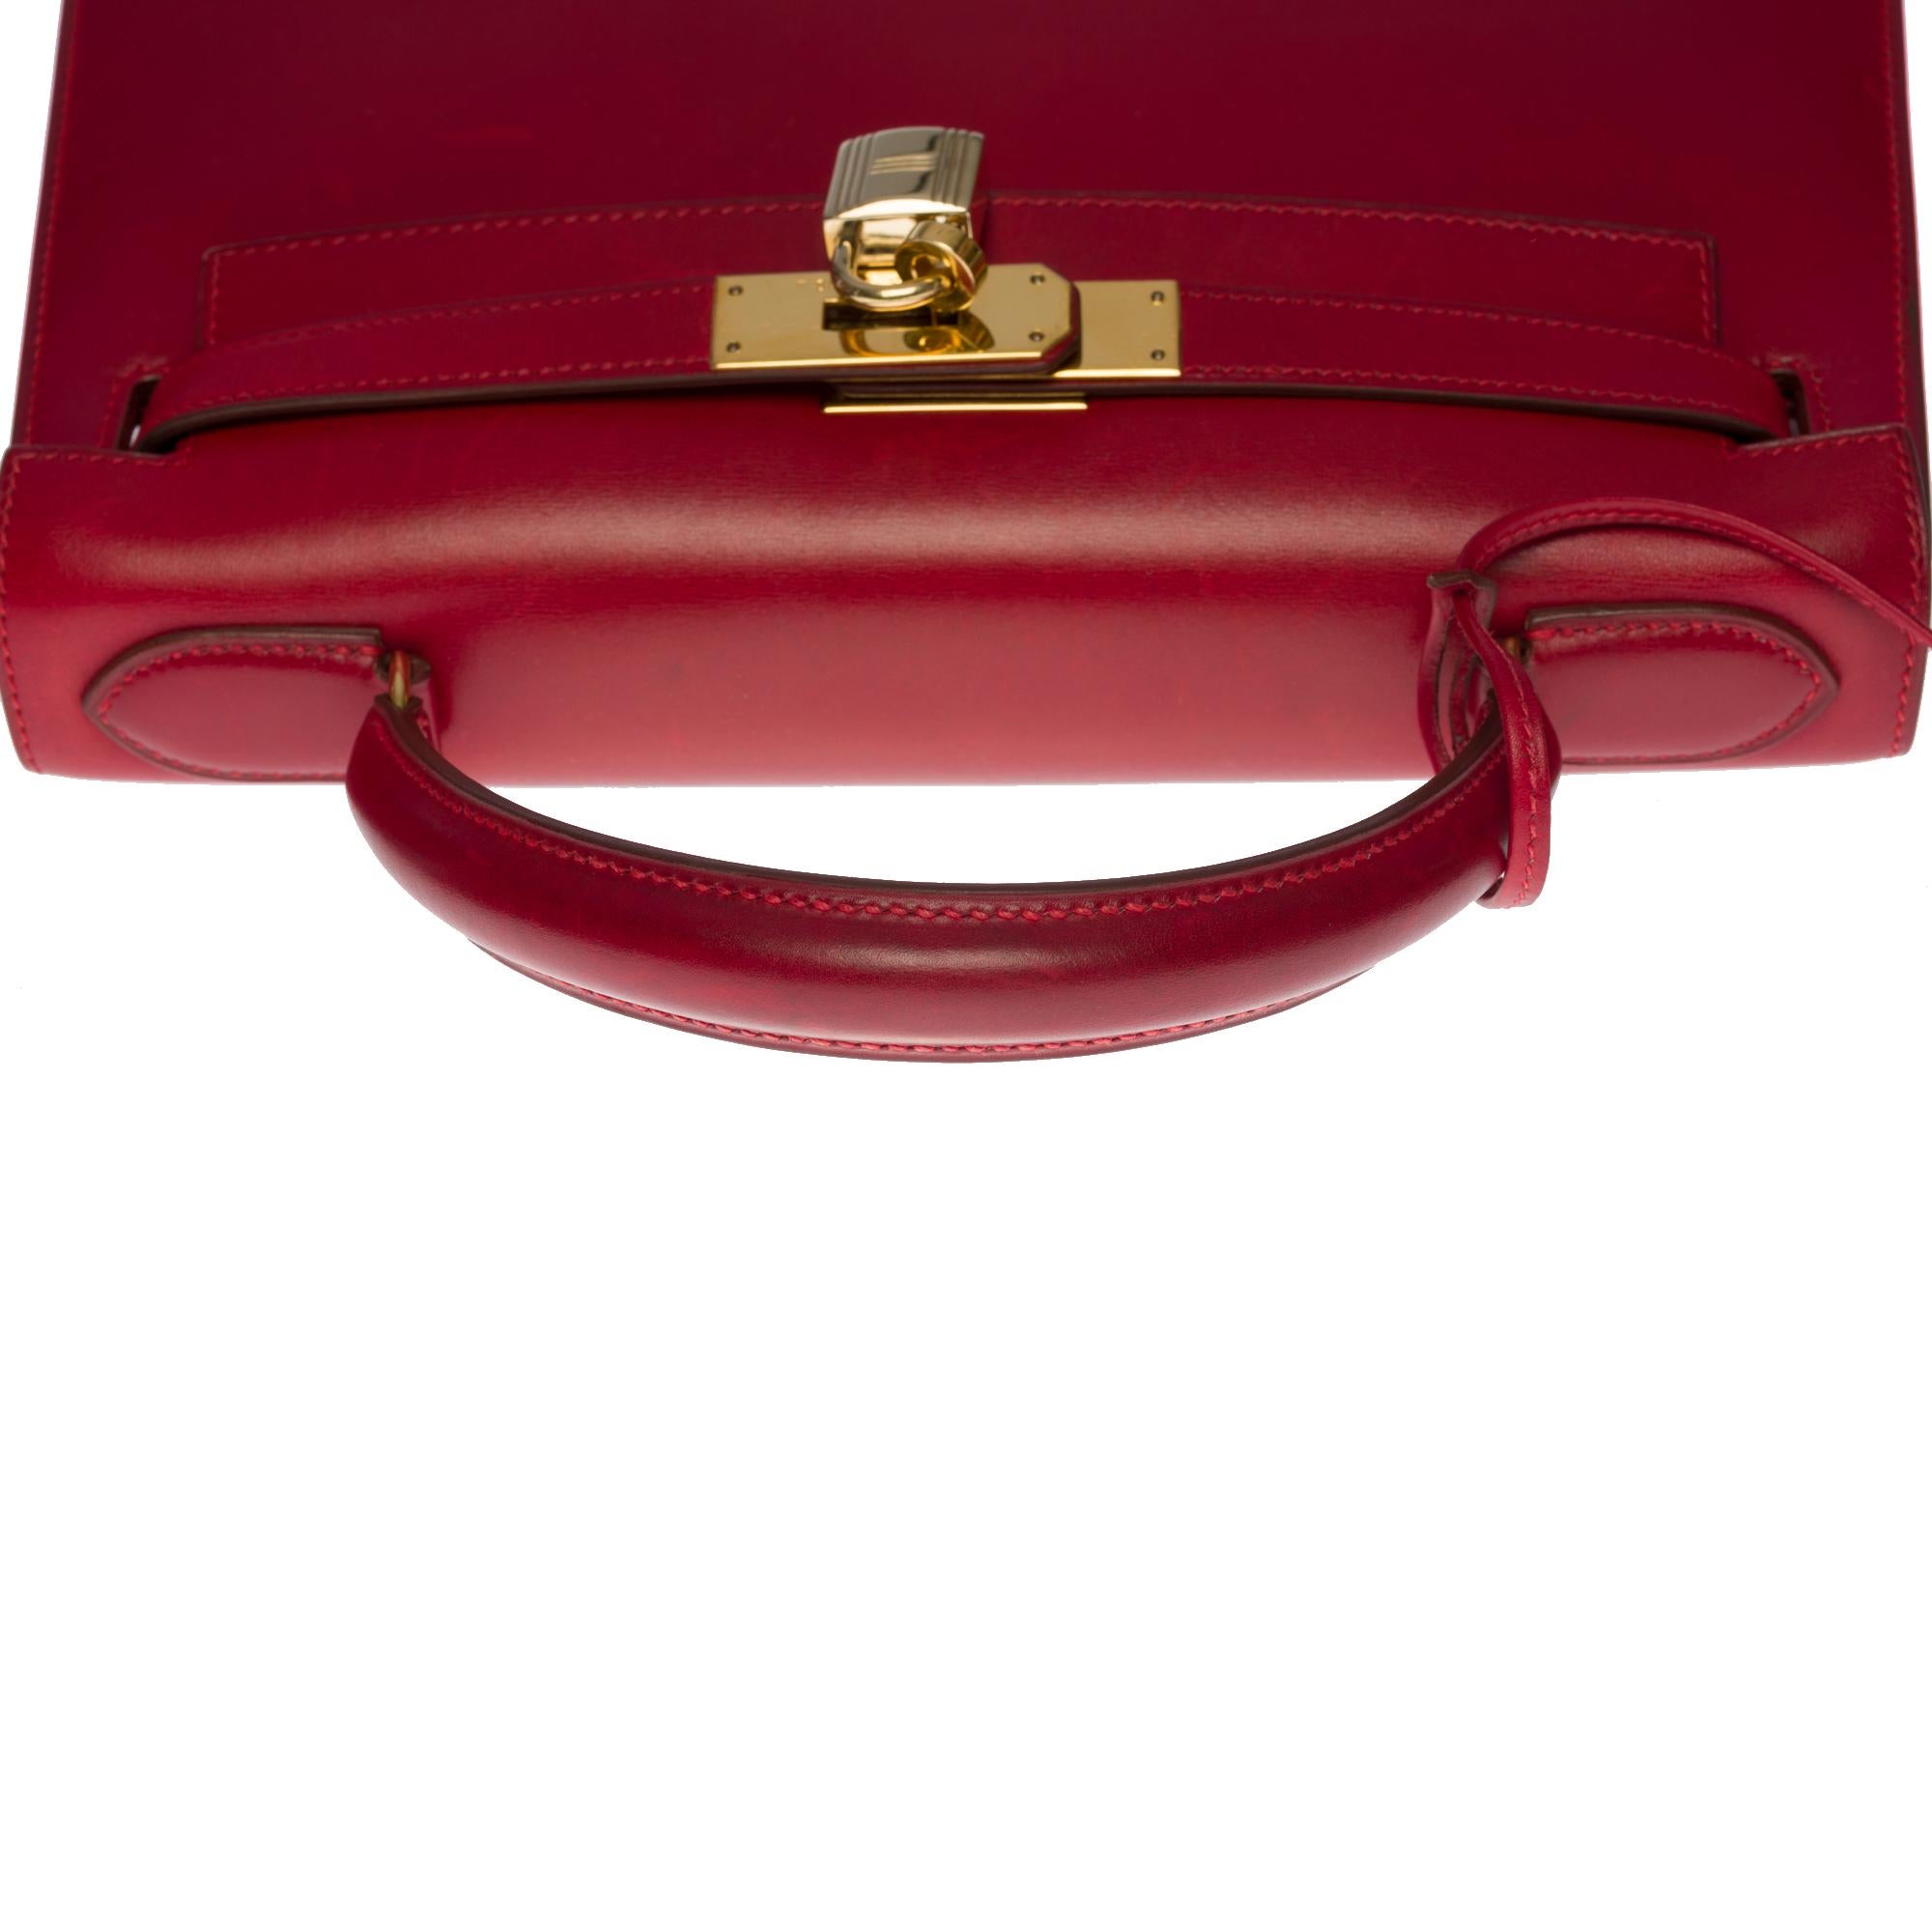 Women's Exceptional Hermes Kelly 28 sellier handbag in Rouge H box calfskin leather, GHW